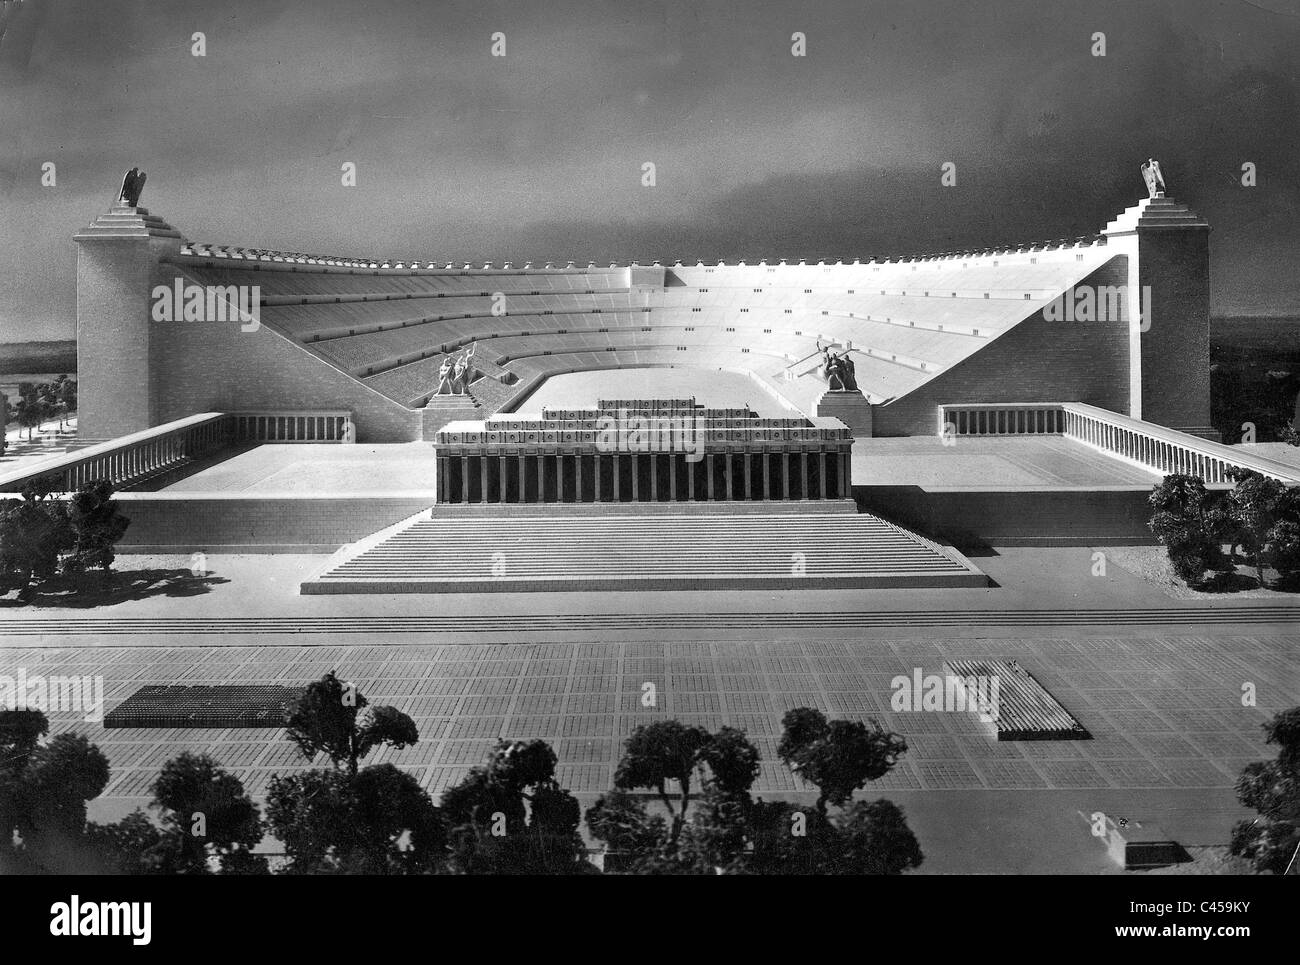 Model of the 'German Stadium' on the Nazi Party Rally Grounds, 1938 Stock Photo